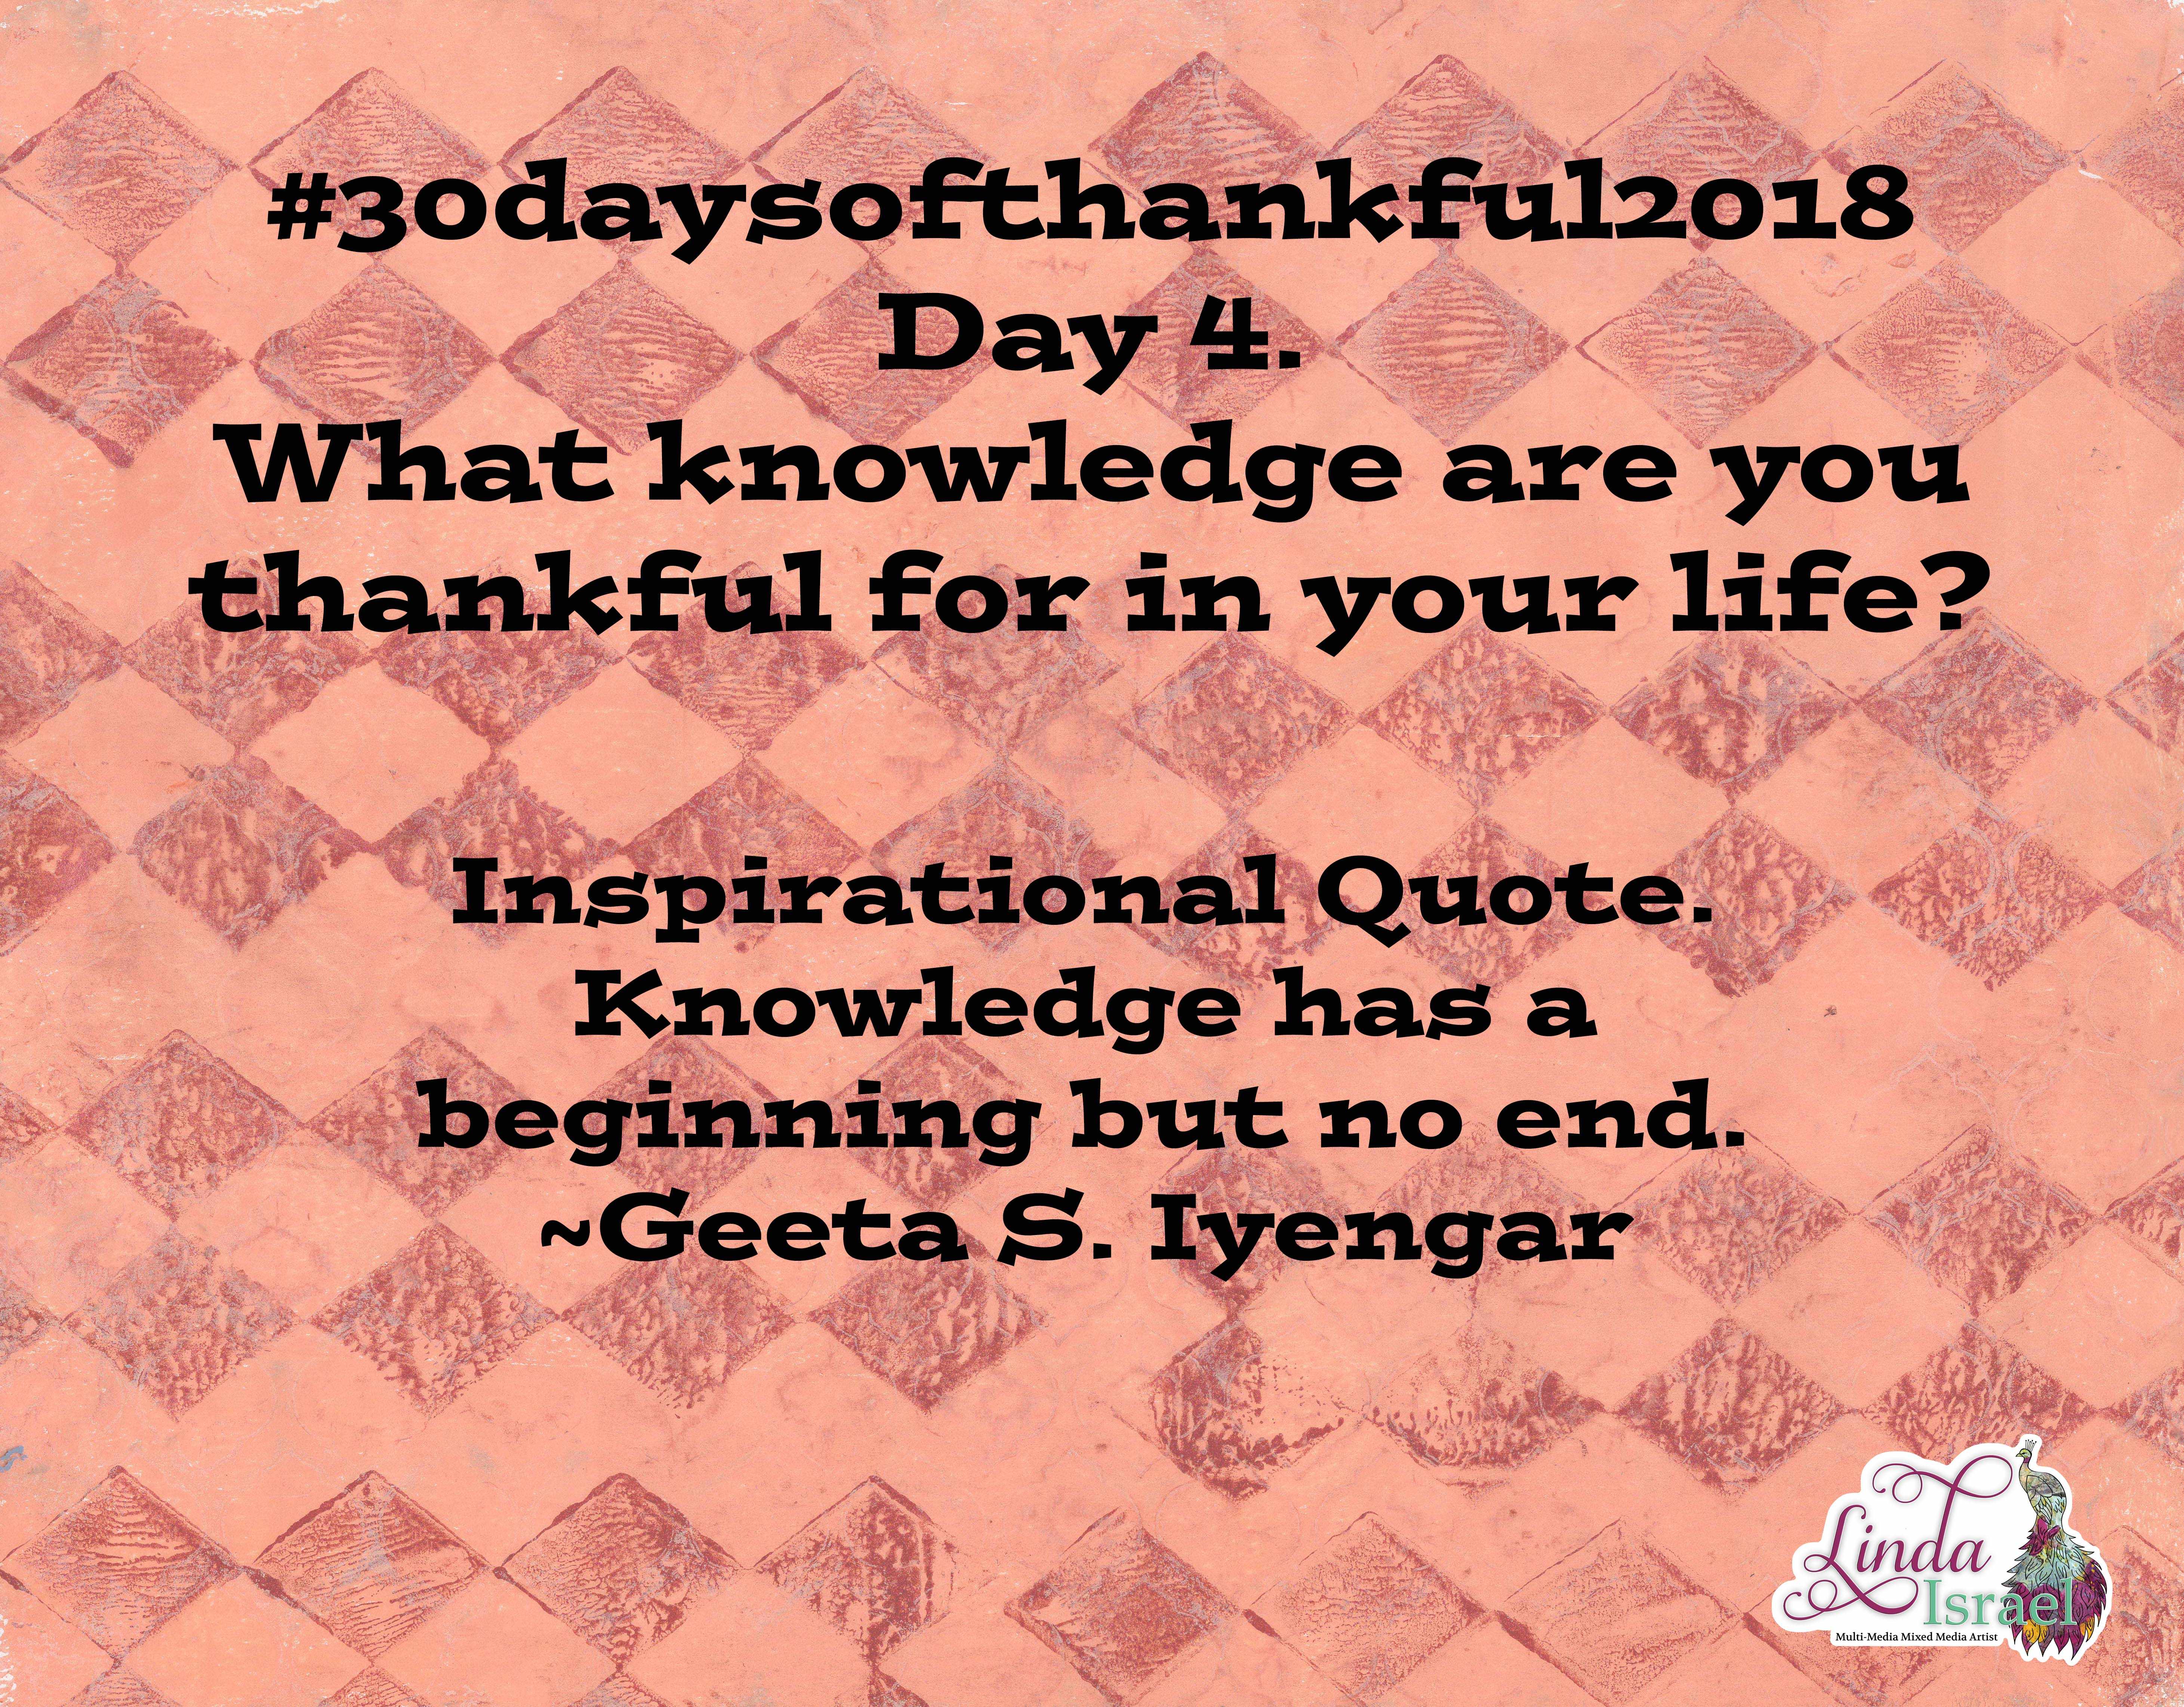 Day 4 of 30 days of Thankful 2018